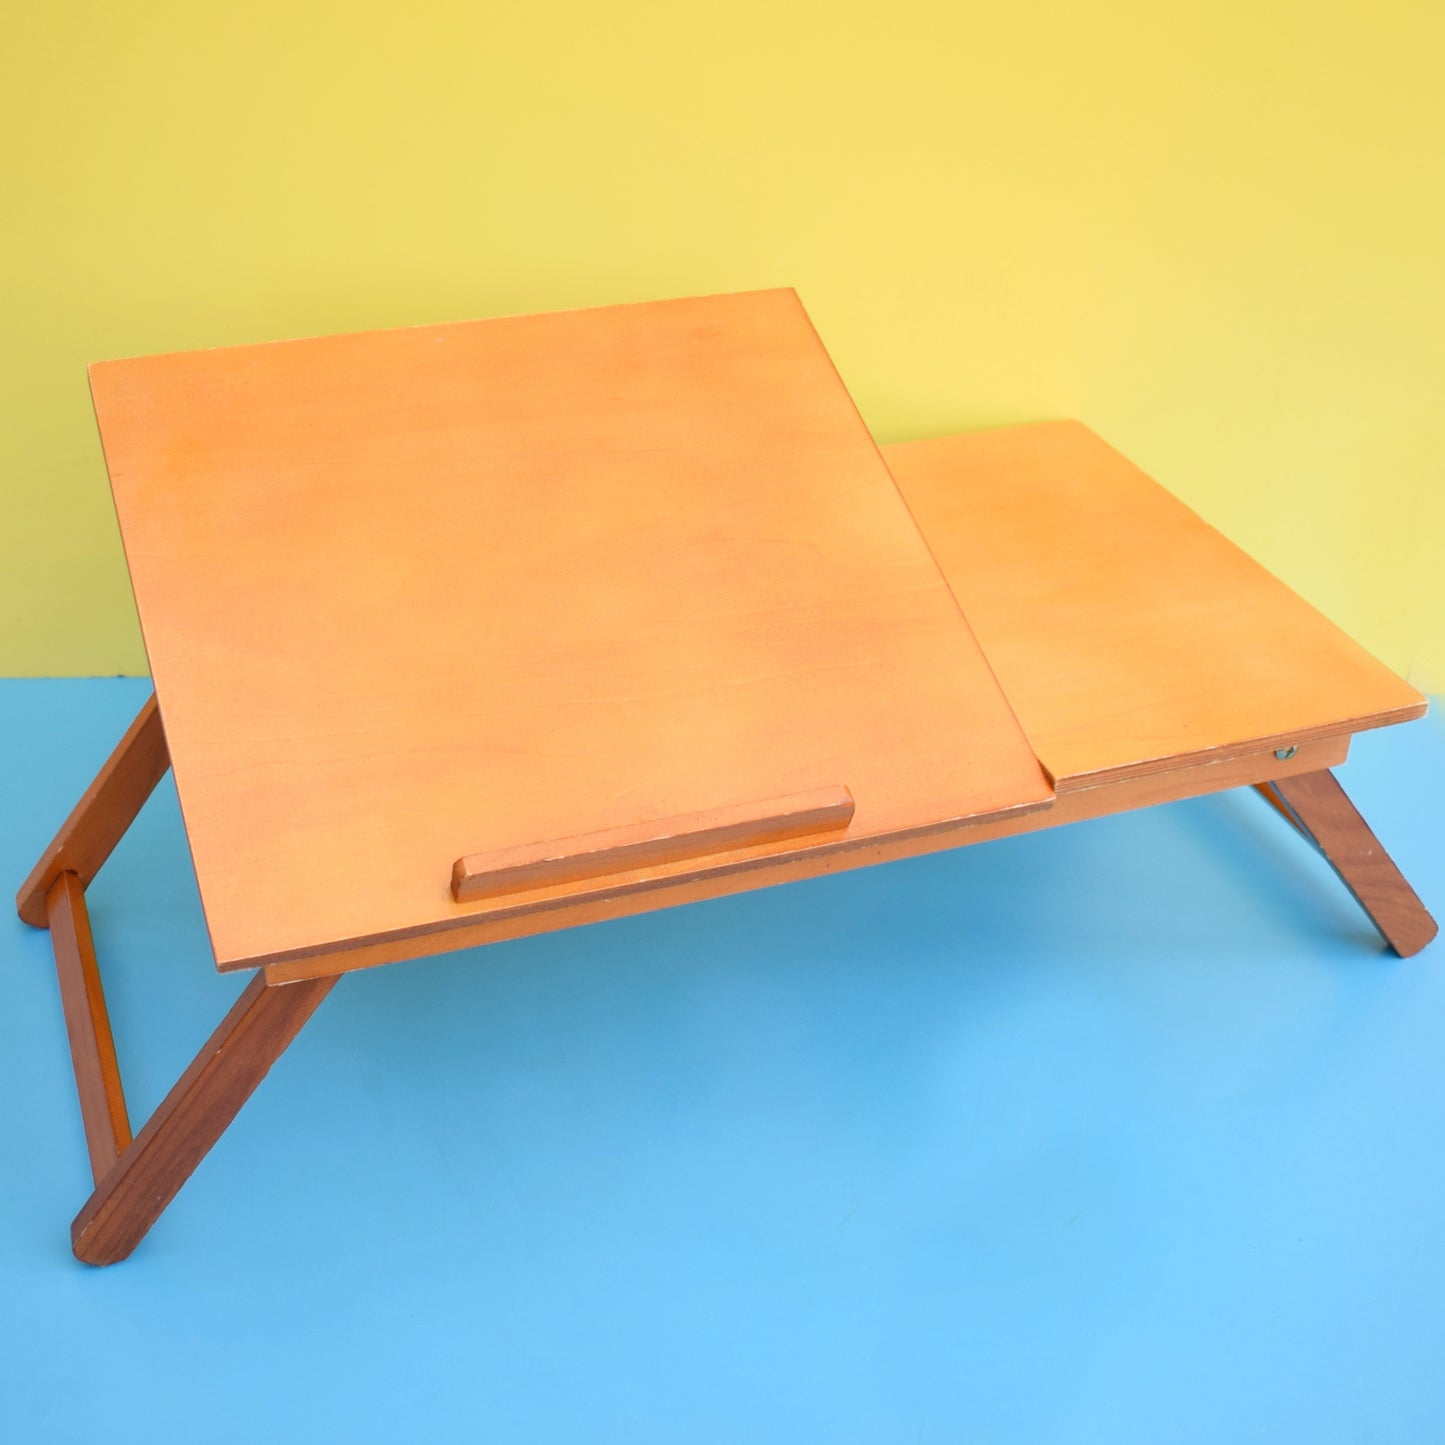 Vintage 1970s Tilting Lap Tray Table - Wooden